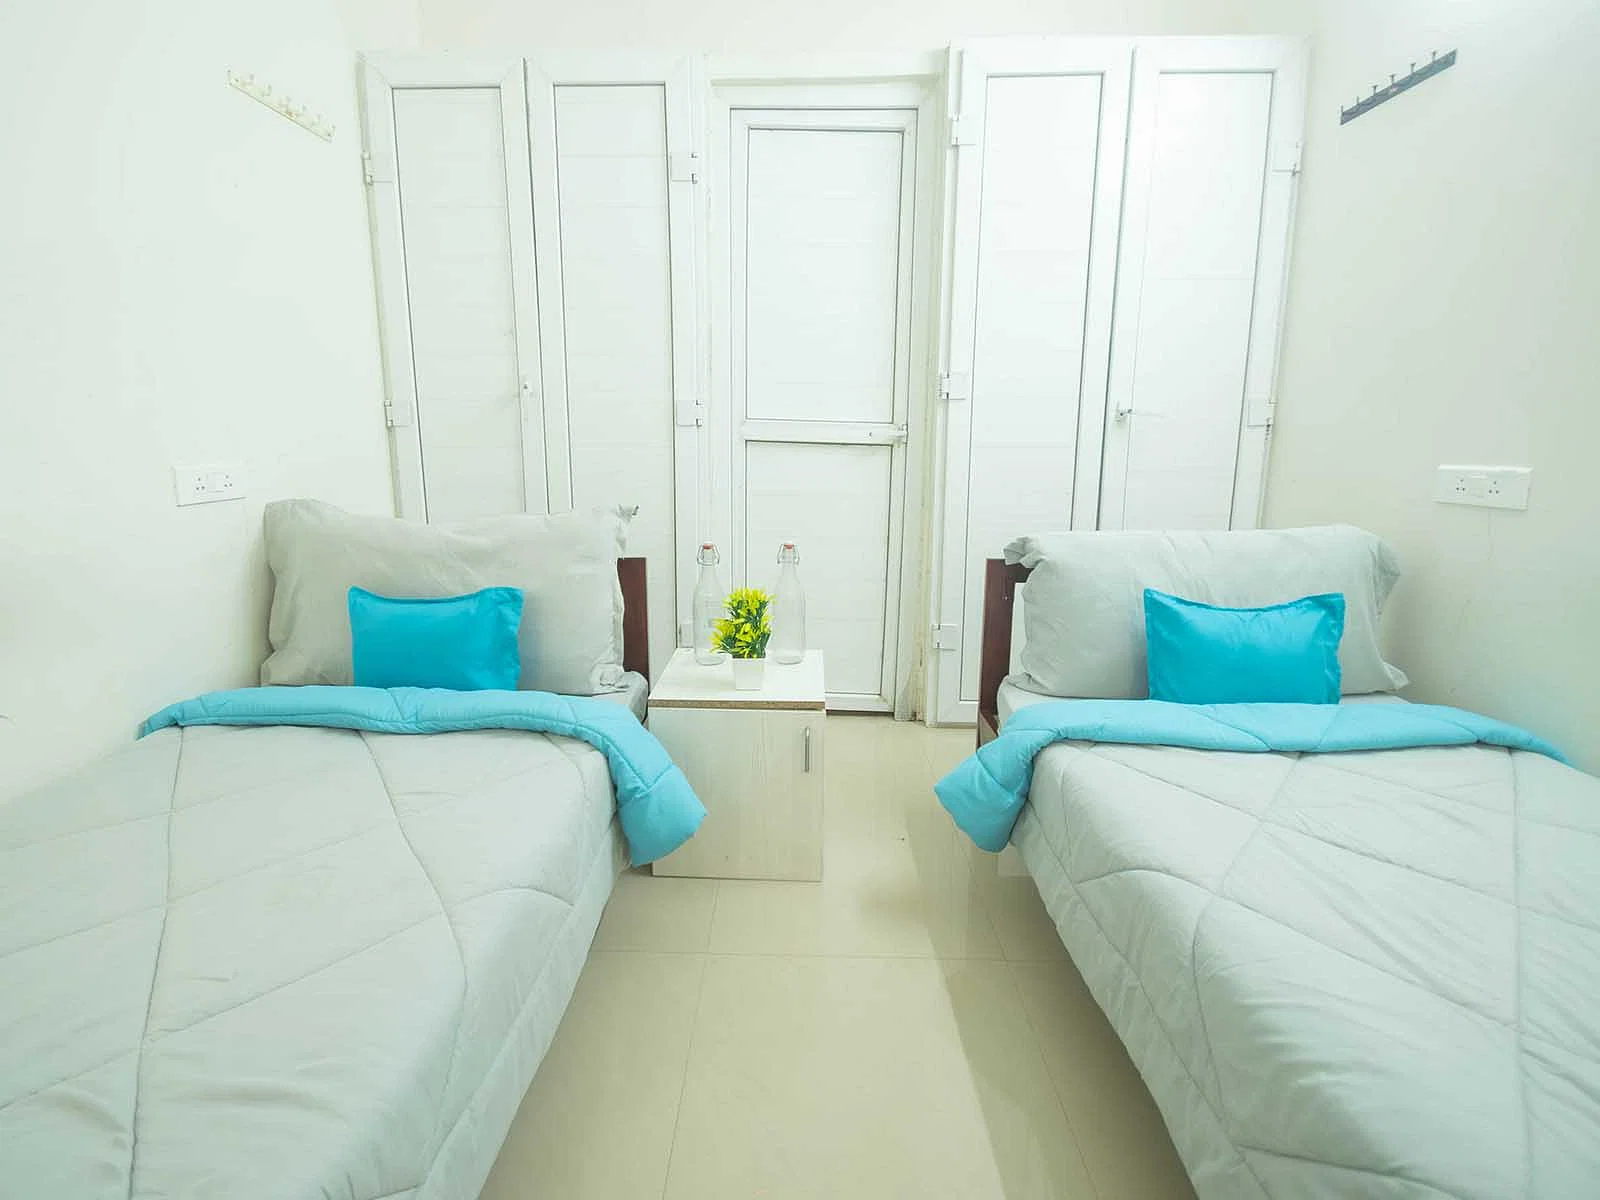 budget-friendly PGs and hostels for gents with single rooms with daily hopusekeeping-Zolo Playa B